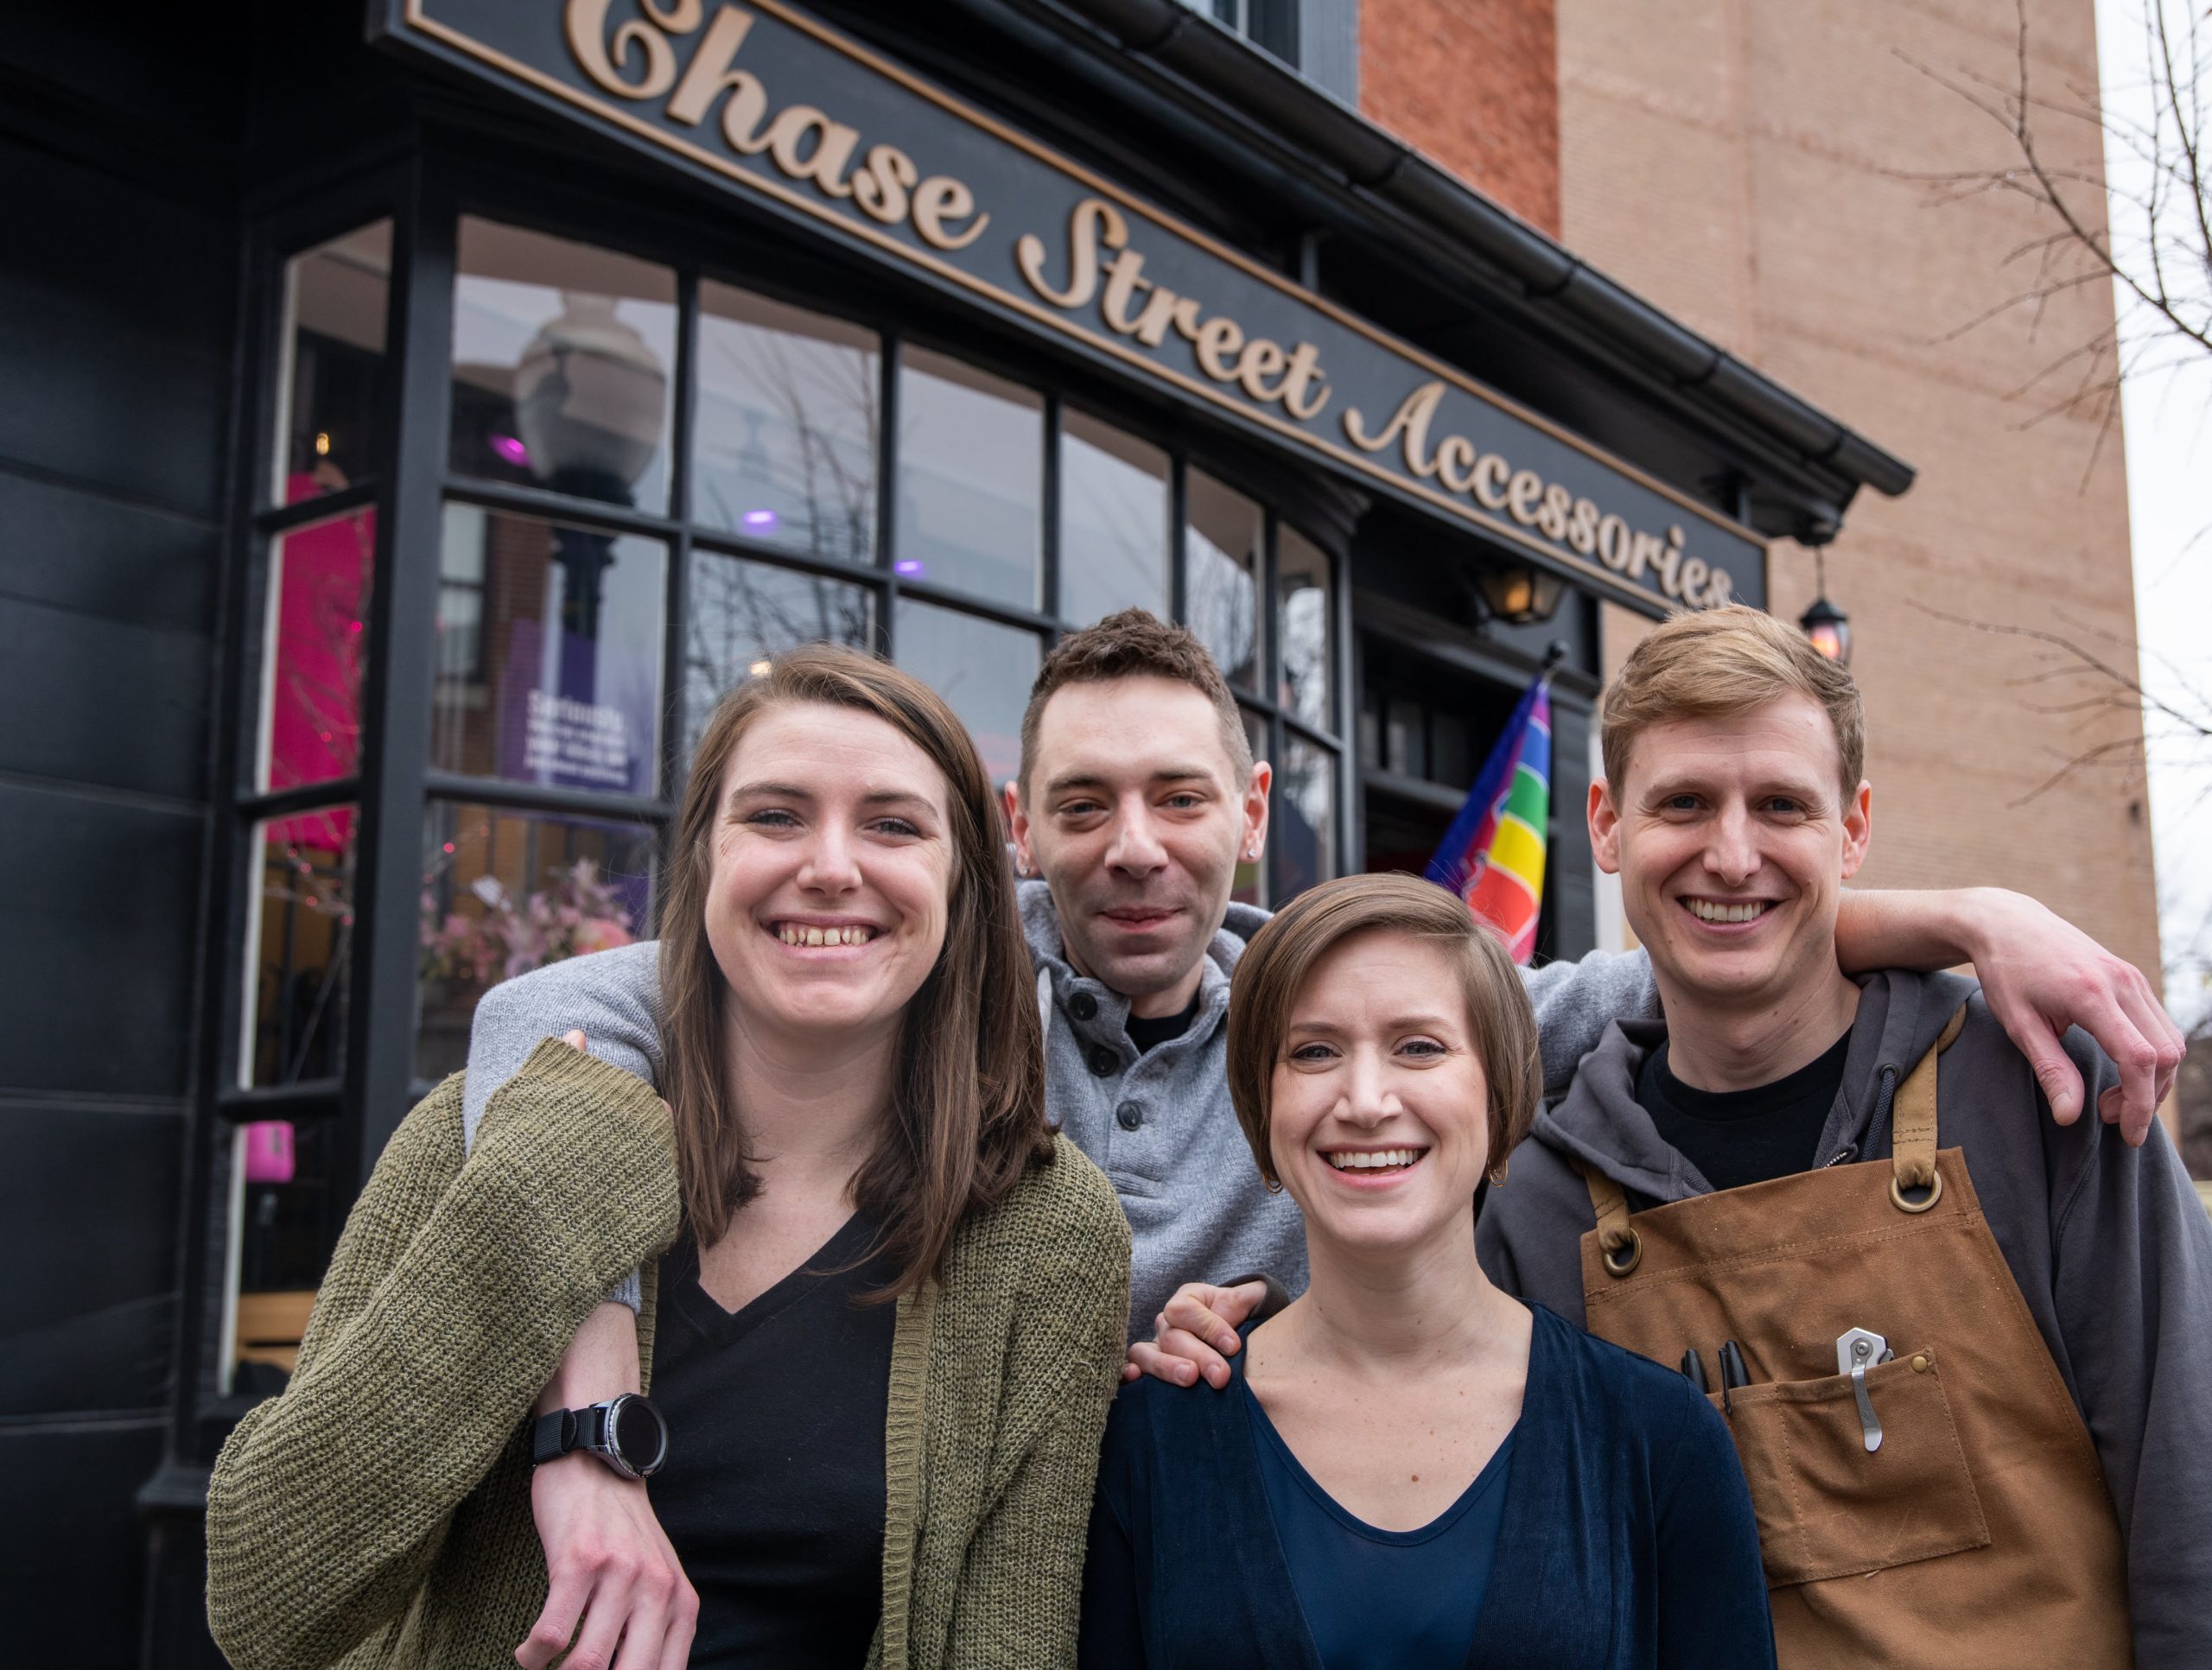 The staff of Chase Street Accessories & Engraving. (Pictured left to right: Lauren Stroll, Chris Beach, Shana Kayne Beach, Marcouiller)